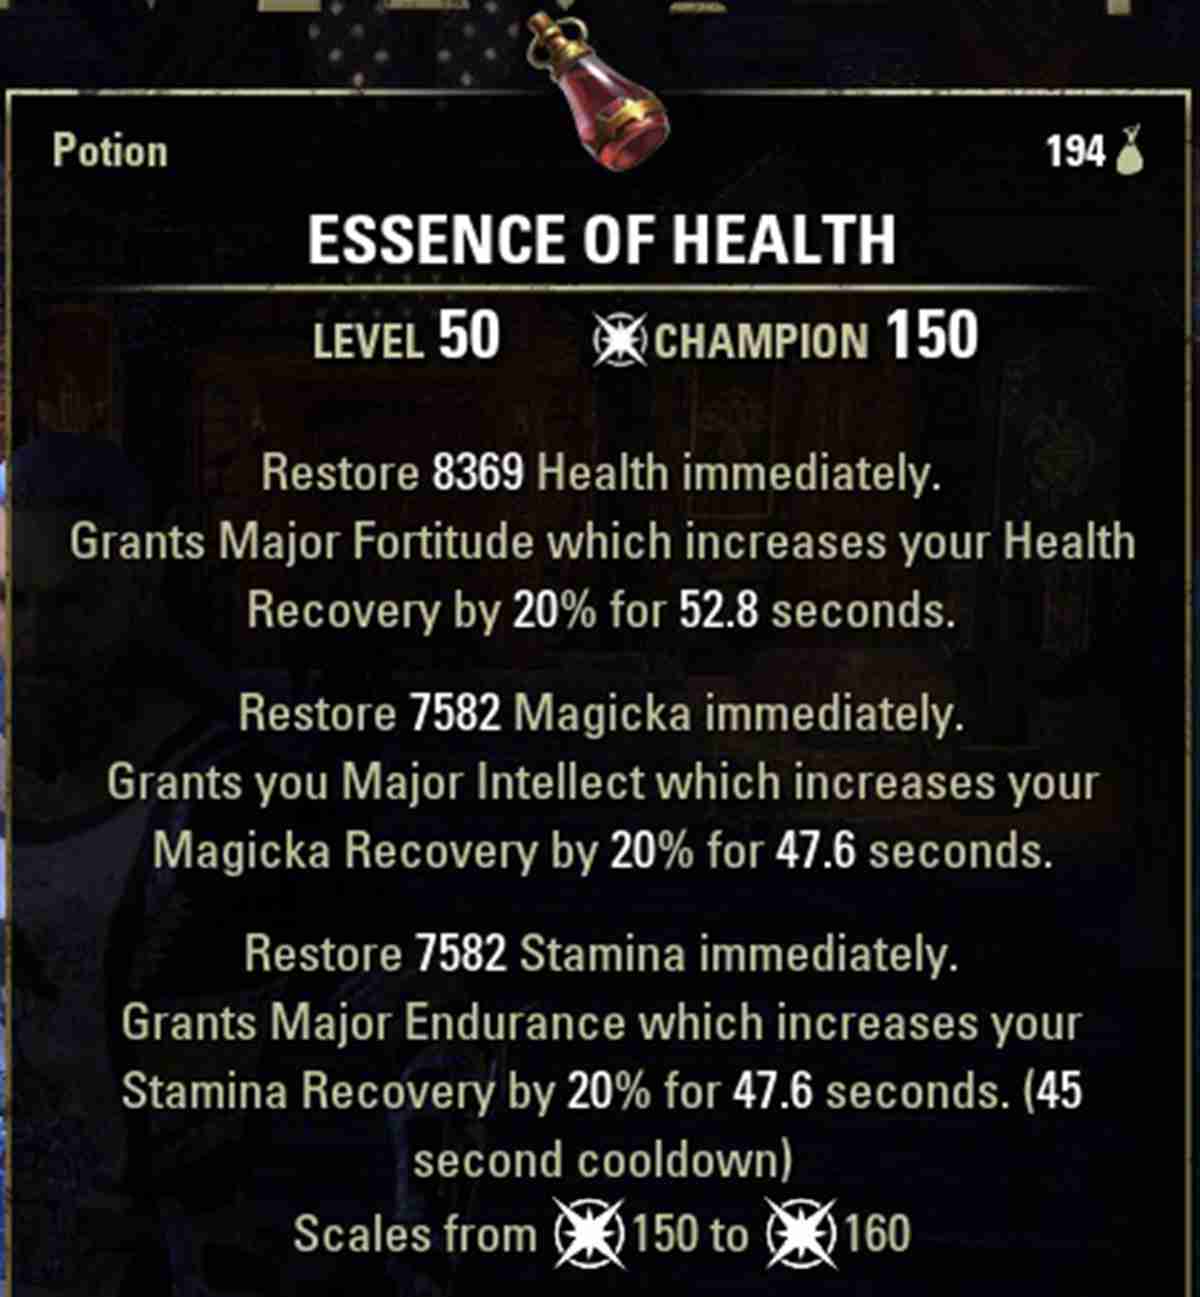 5 Best Potions in ESO - Essence of Health